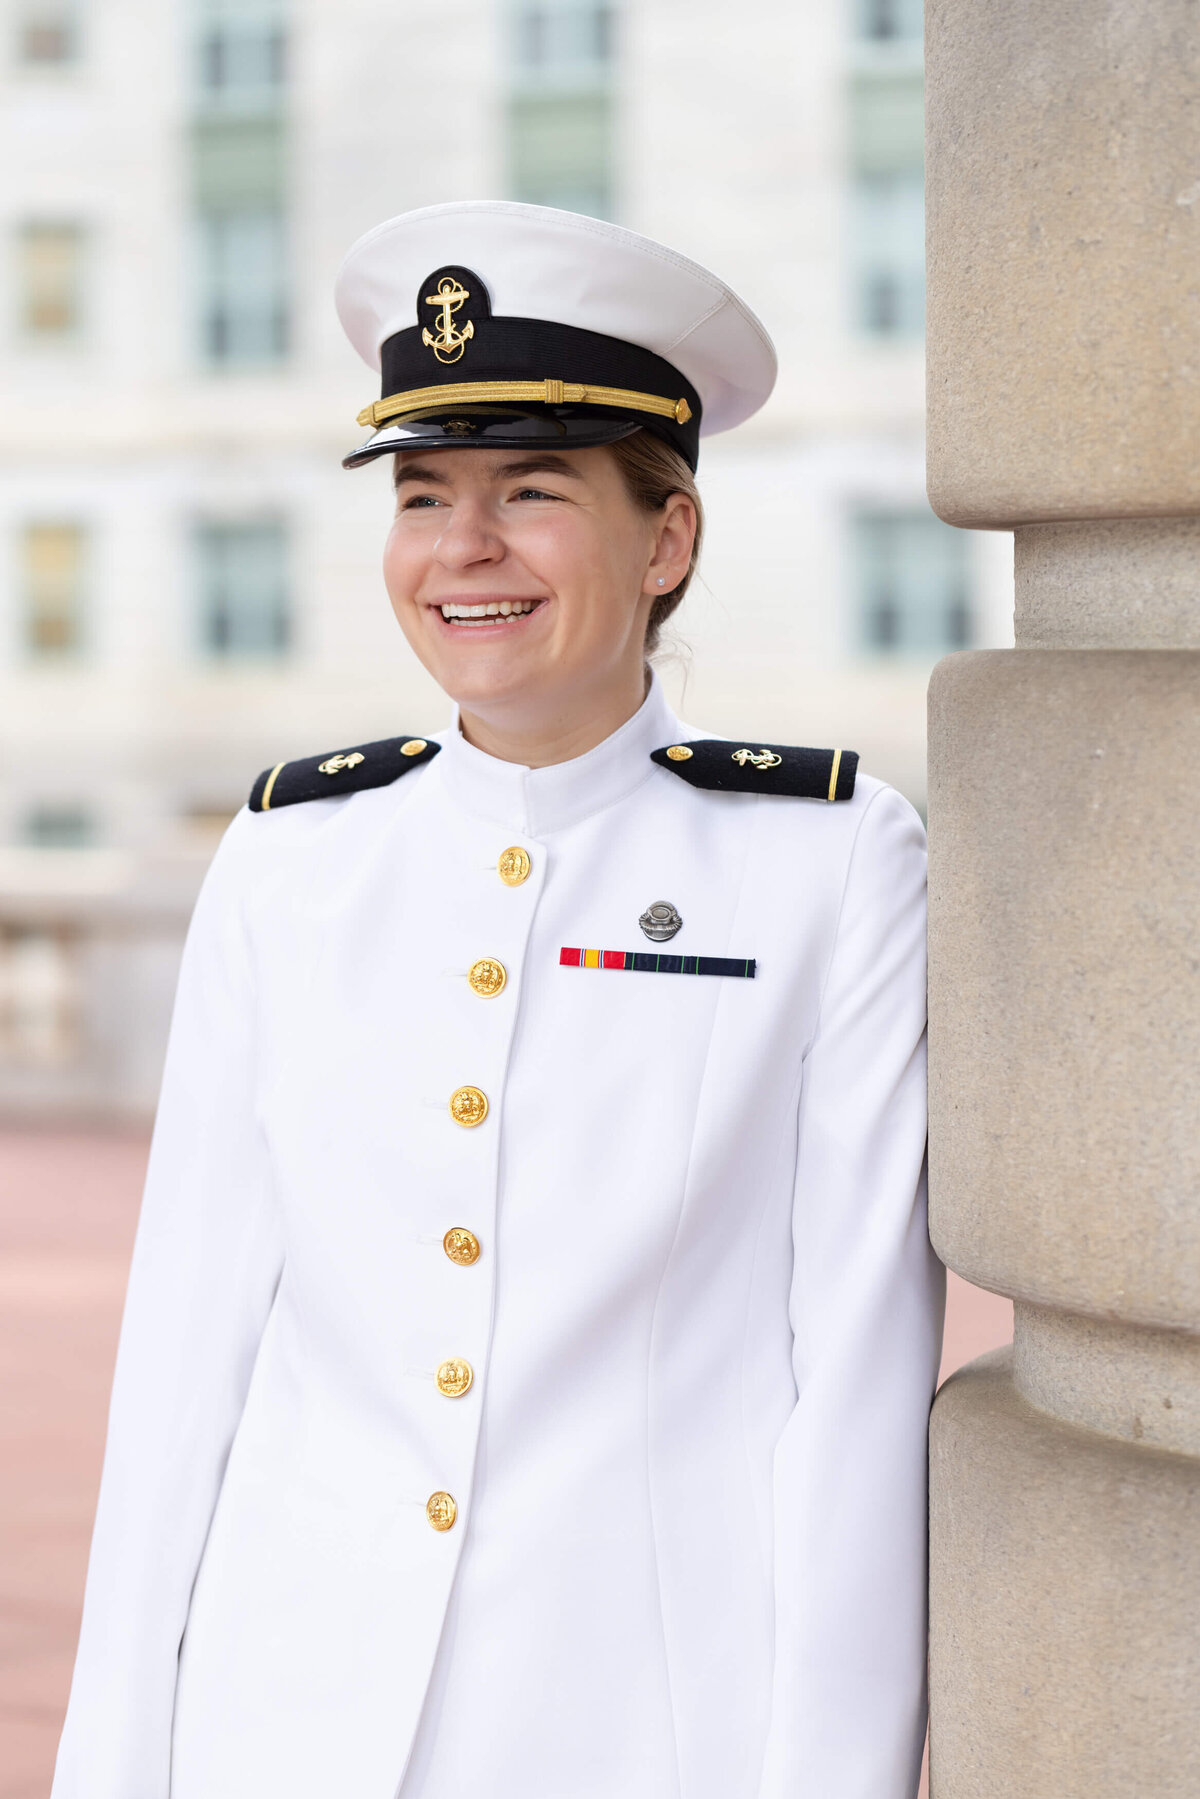 Woman Naval officer smiles in whites uniform.